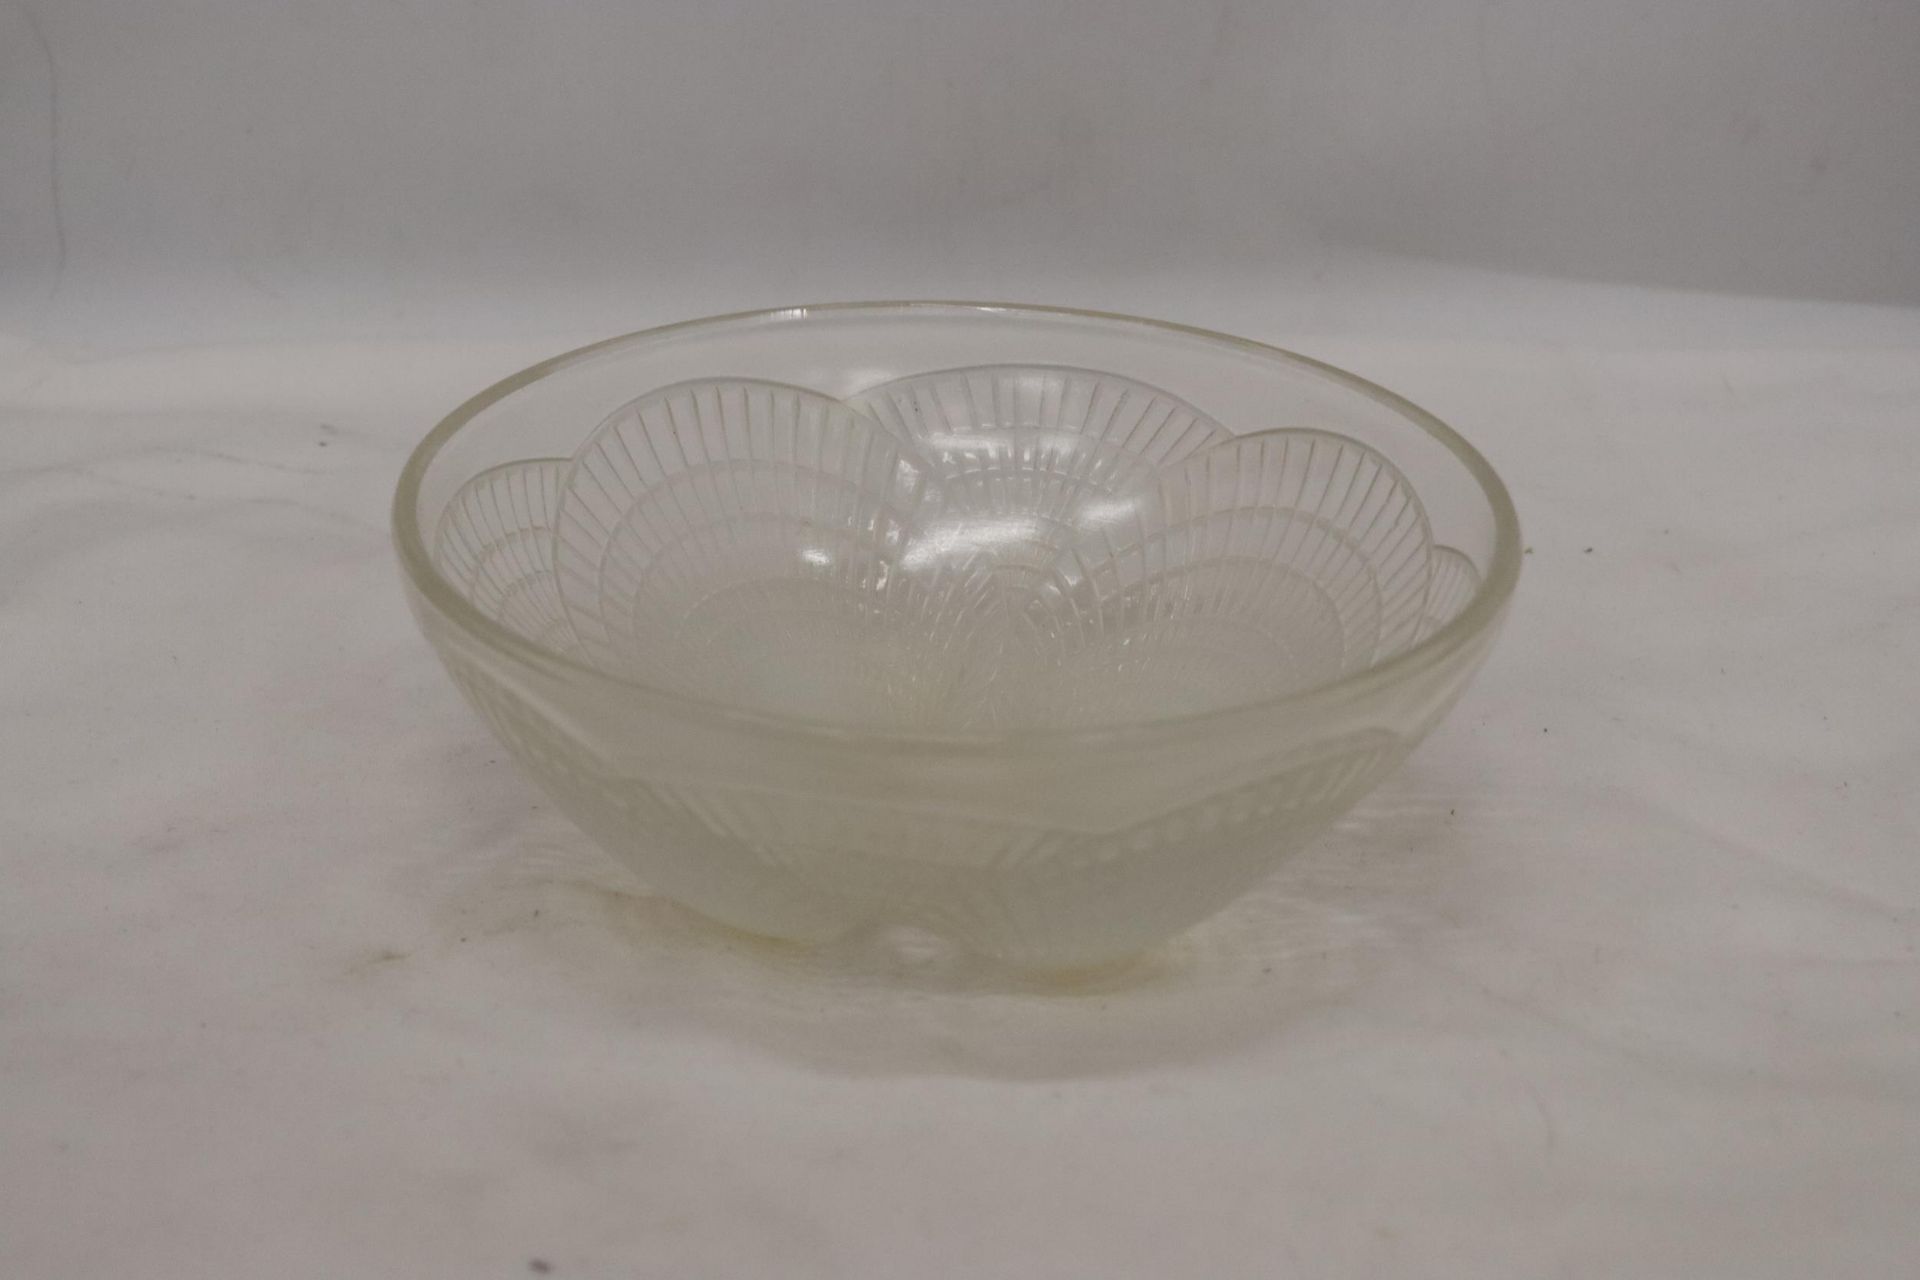 A R LALIQUE FRANCE NO 3202 COCQUILLES PATTERN GLASS BOWL SIGNED TO BASE 18CM DIAMETER